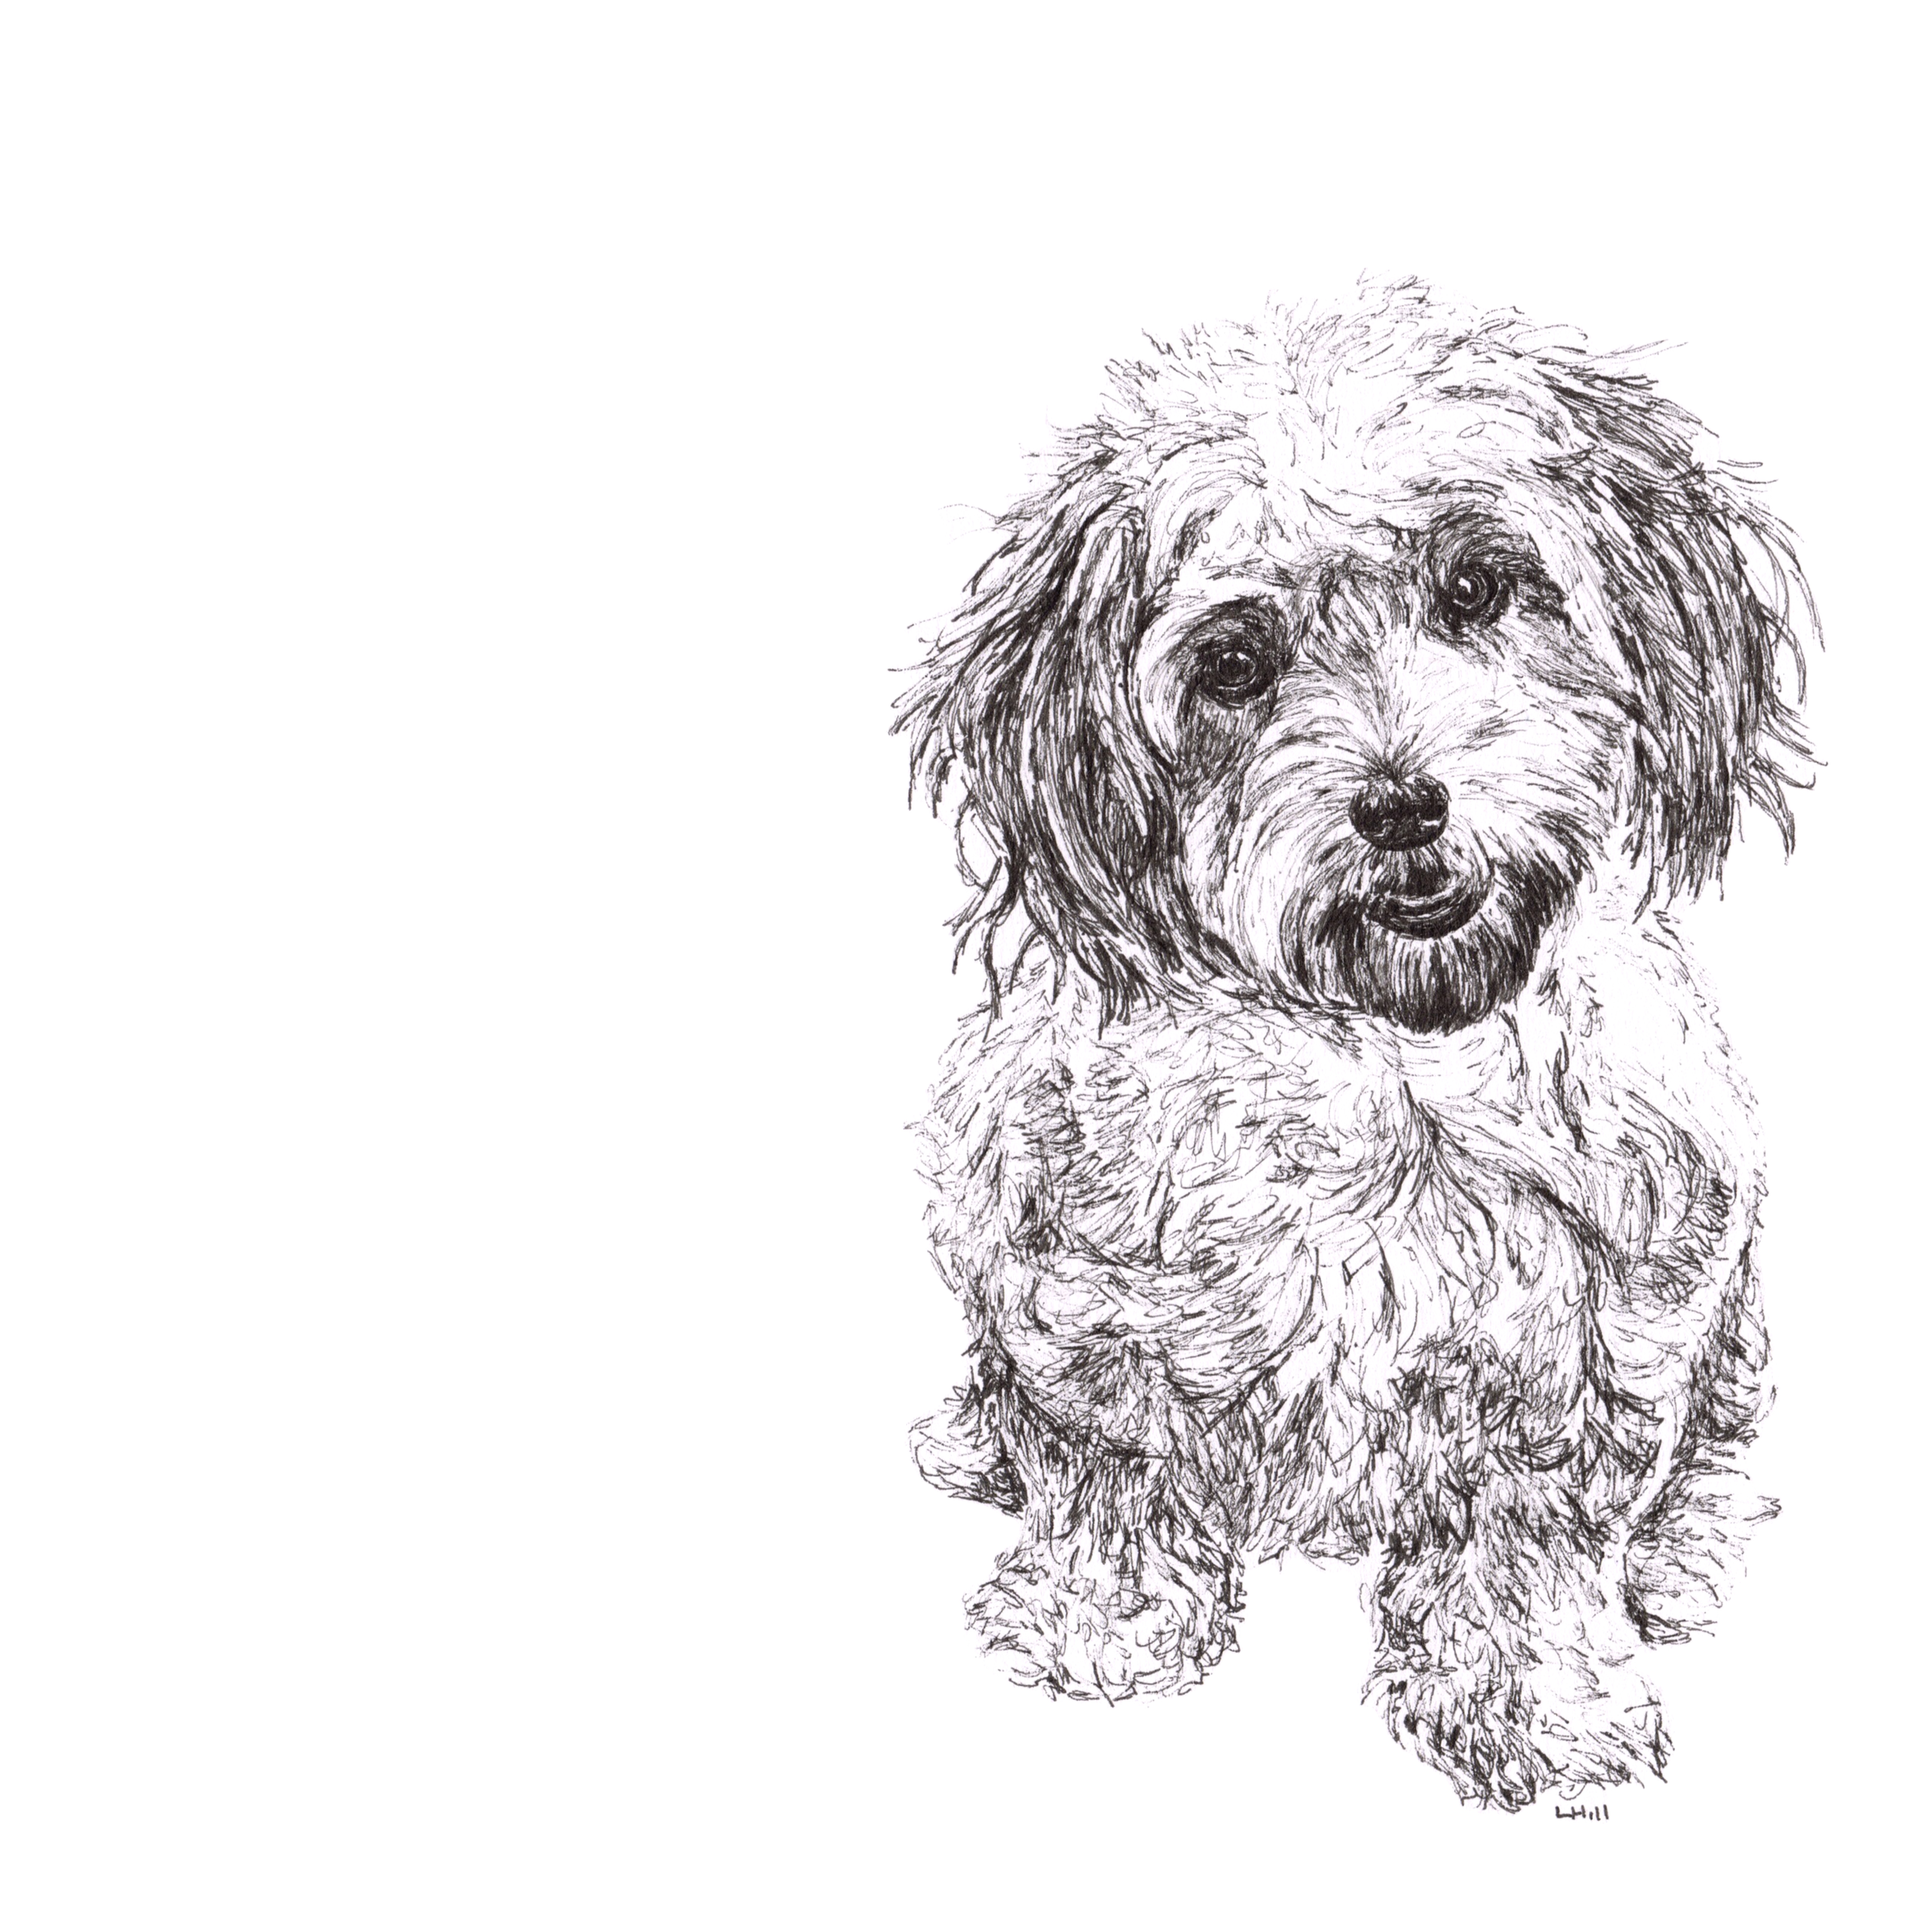 Cavachon pen and ink illustration by Louisa Hill